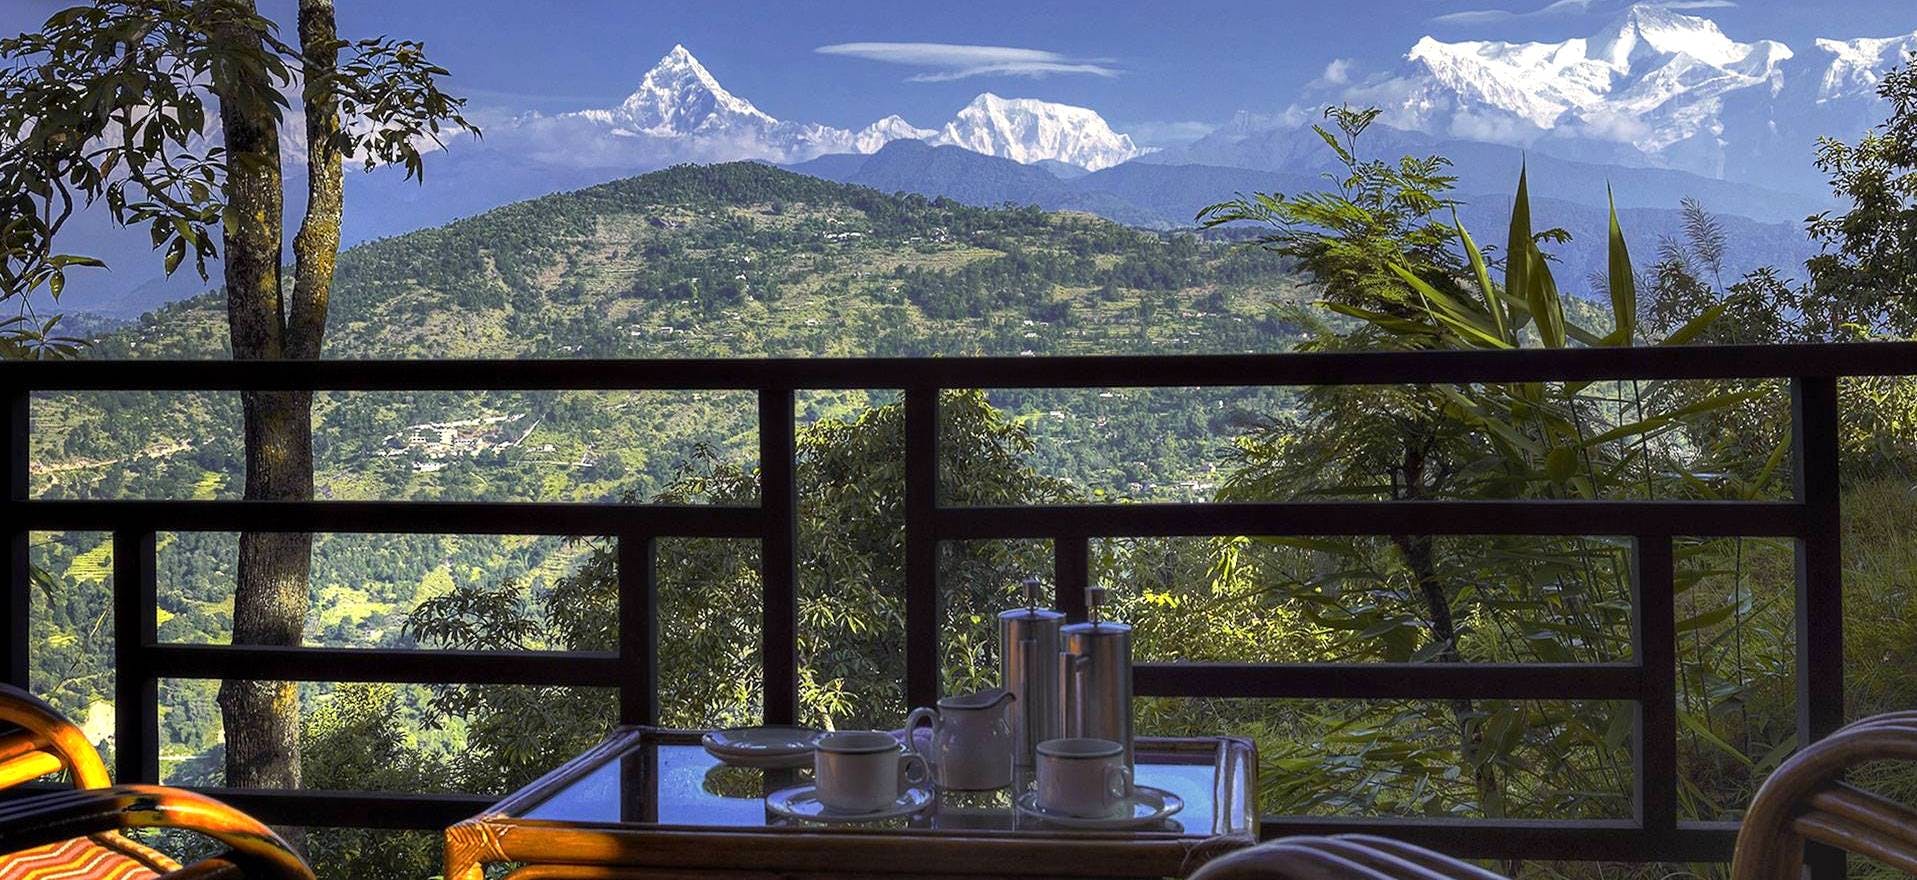 Luxury services in Nepal